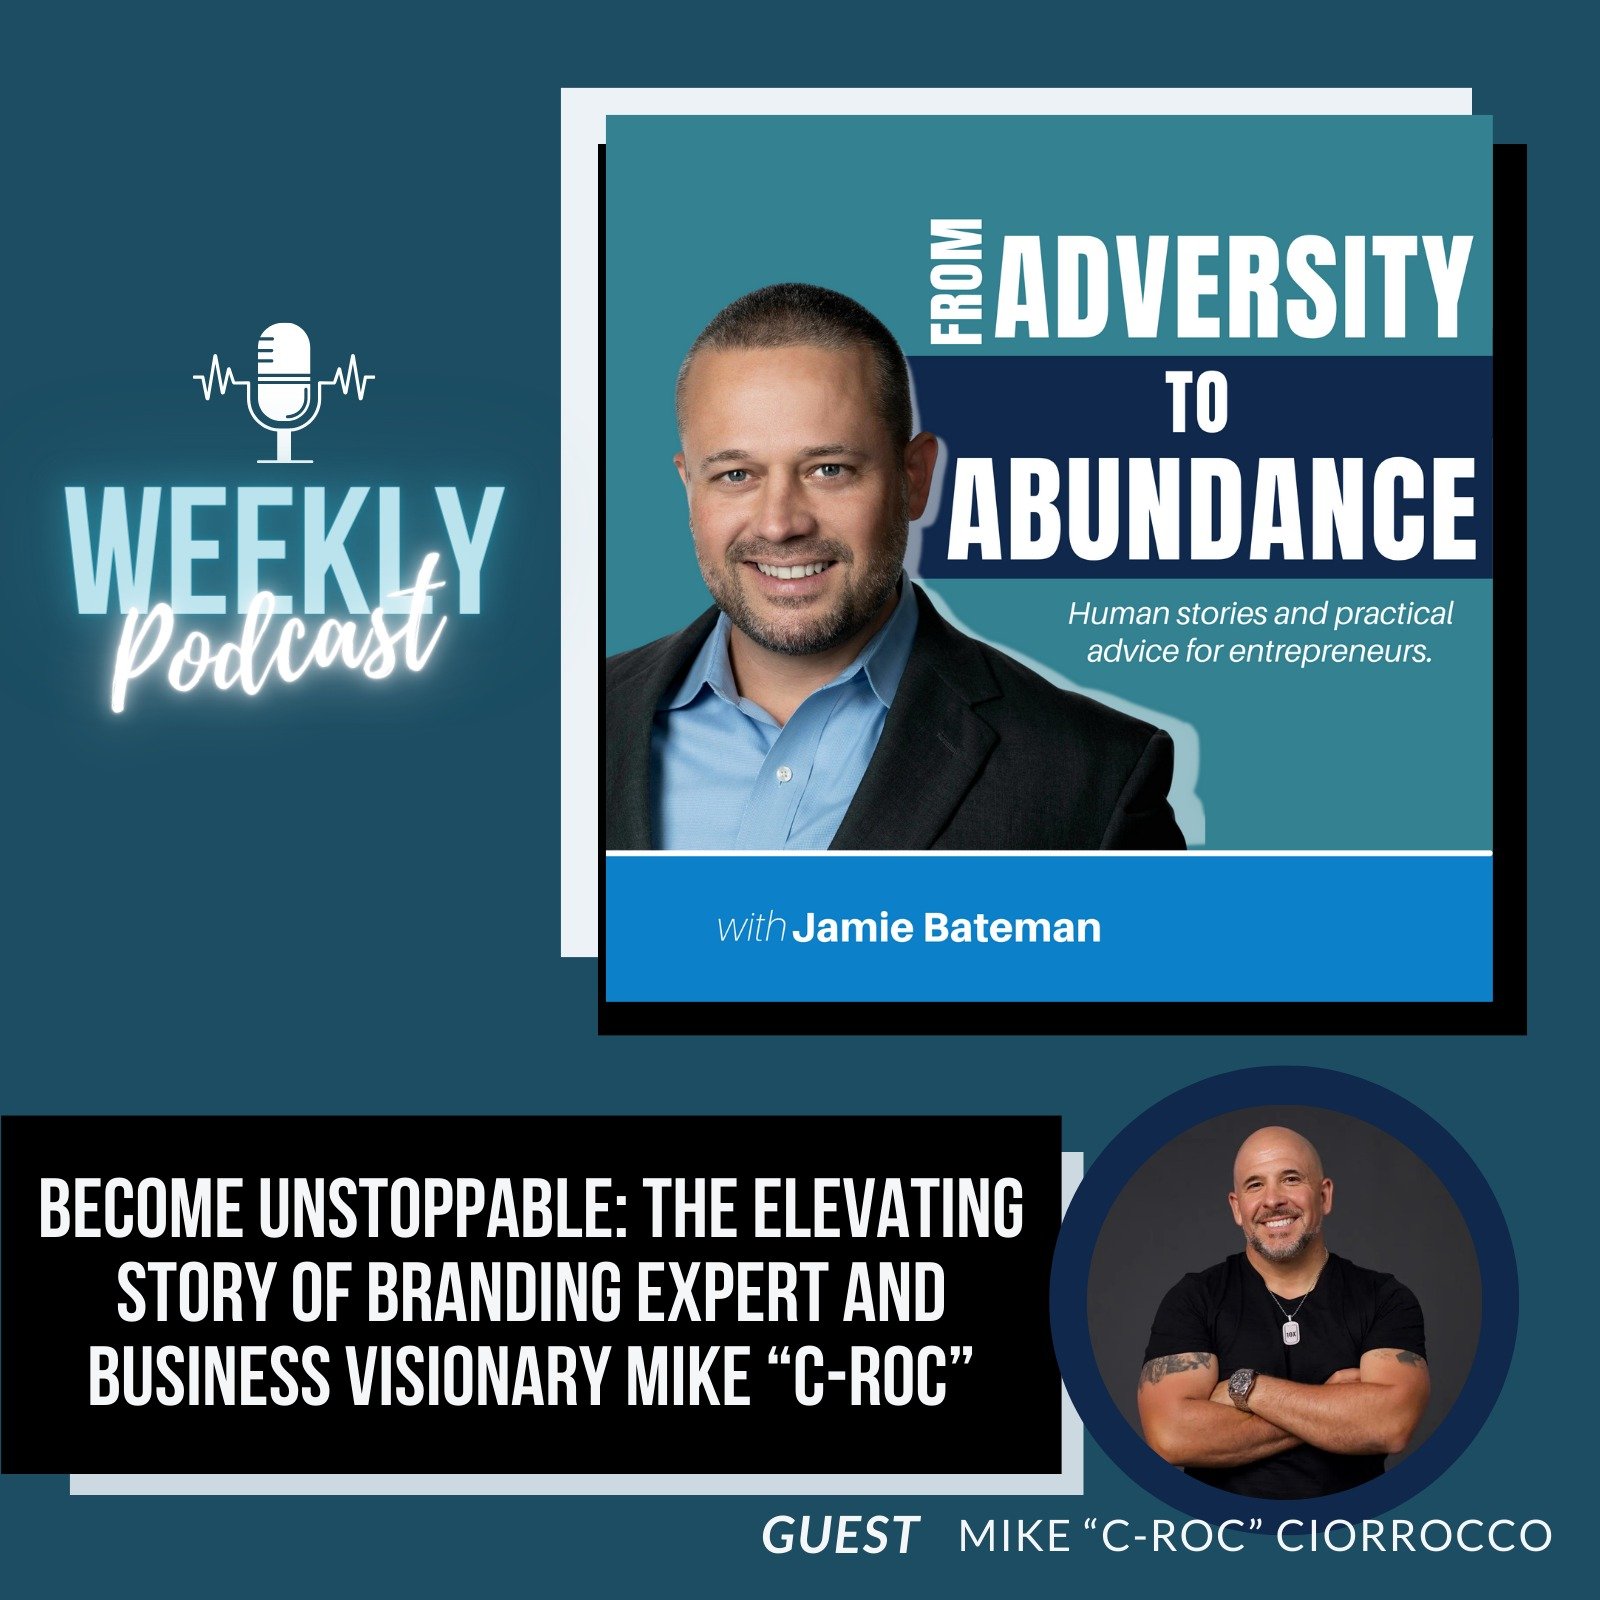 Become Unstoppable: The Elevating Story of Branding Expert and Business Visionary Mike “C-Roc”